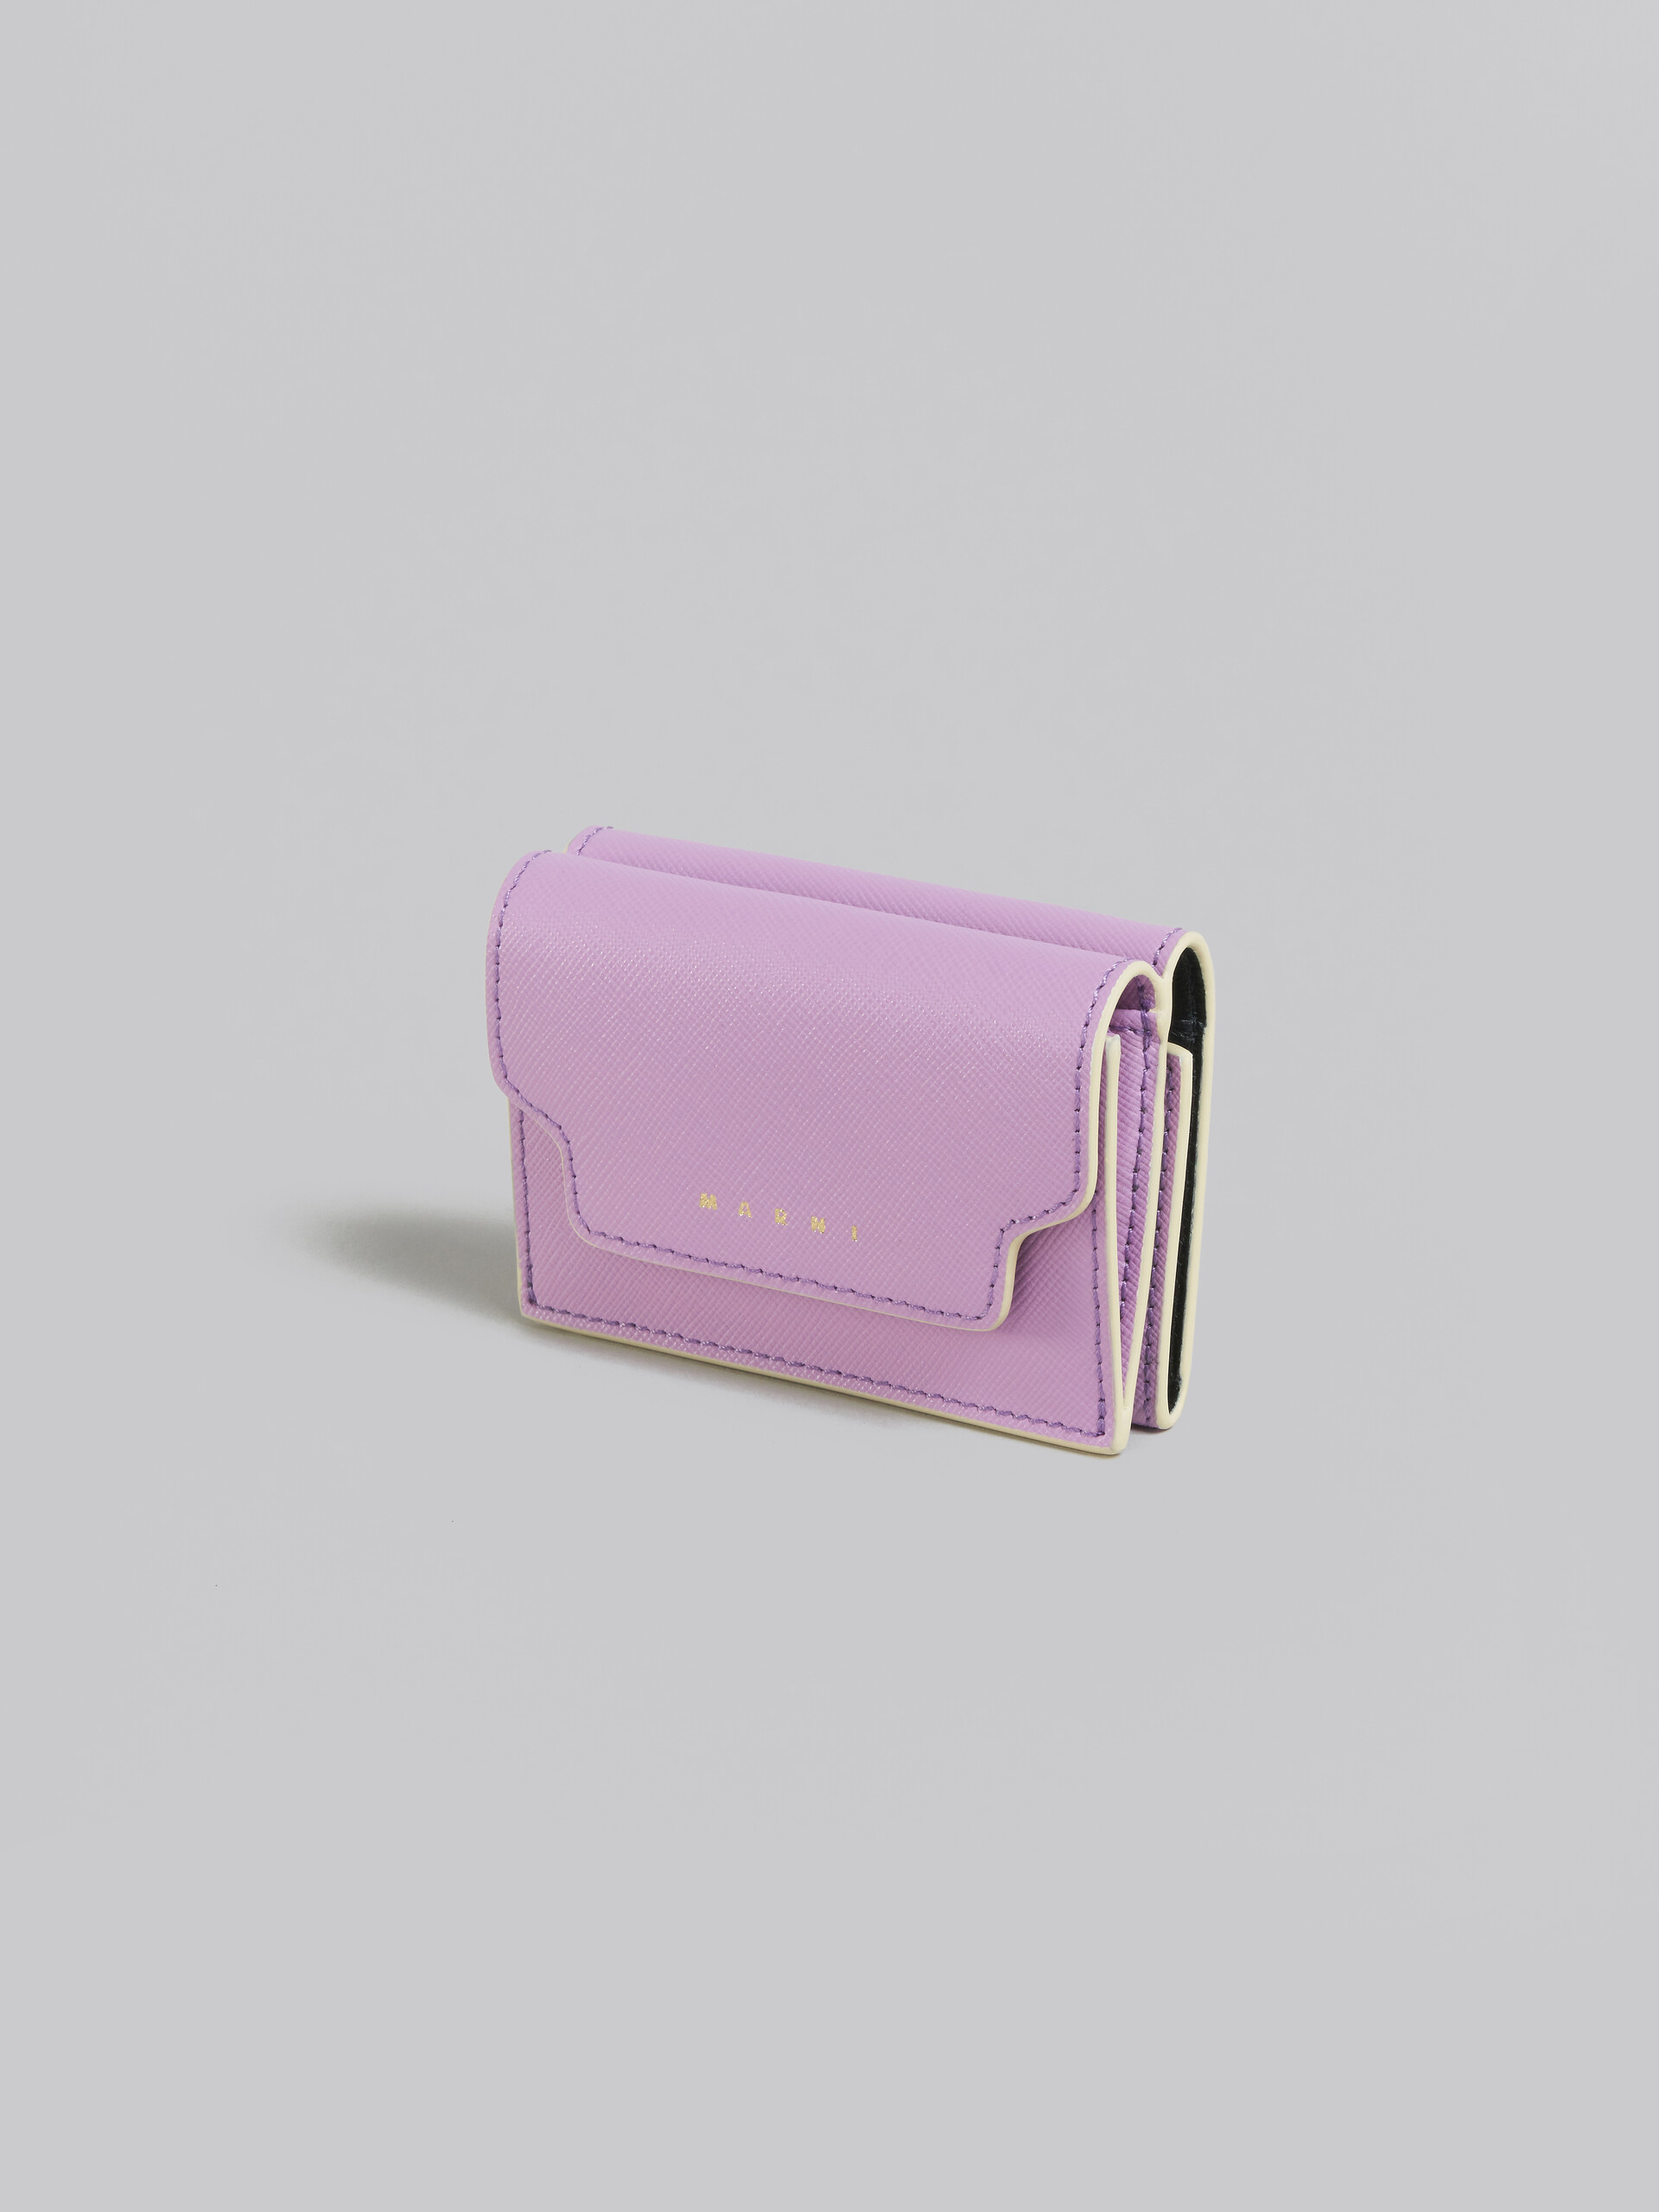 Lilac saffiano leather tri-fold wallet - Wallets - Image 4